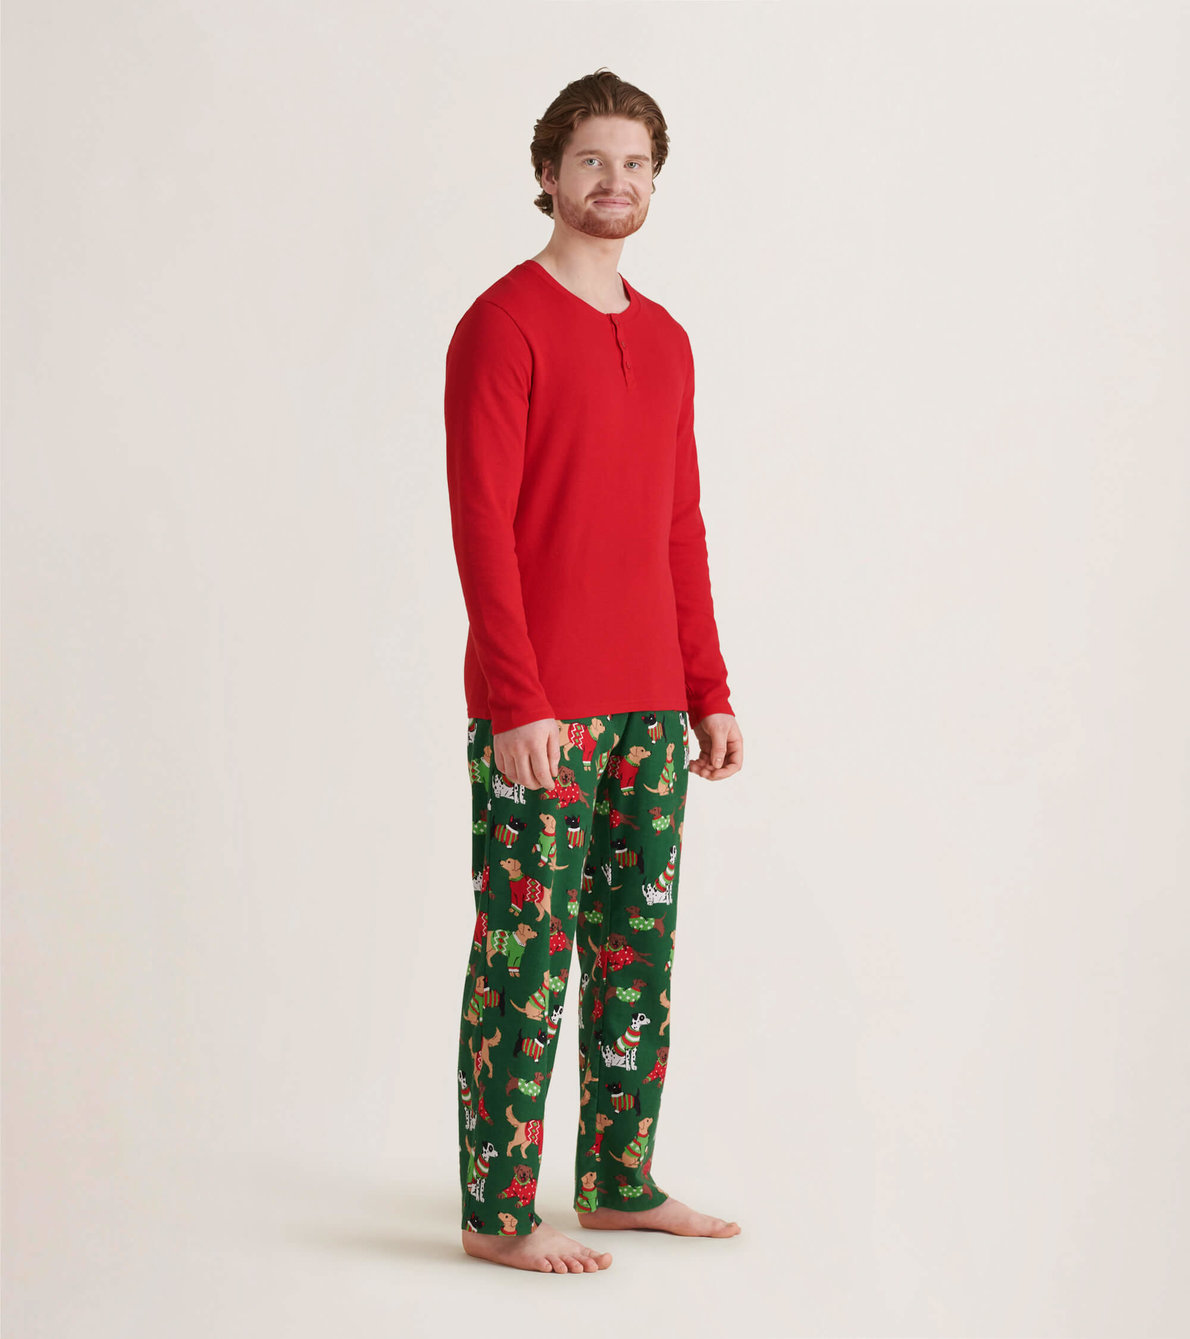 View larger image of Woofing Christmas Men's Henley and Pants Pajamas Separates